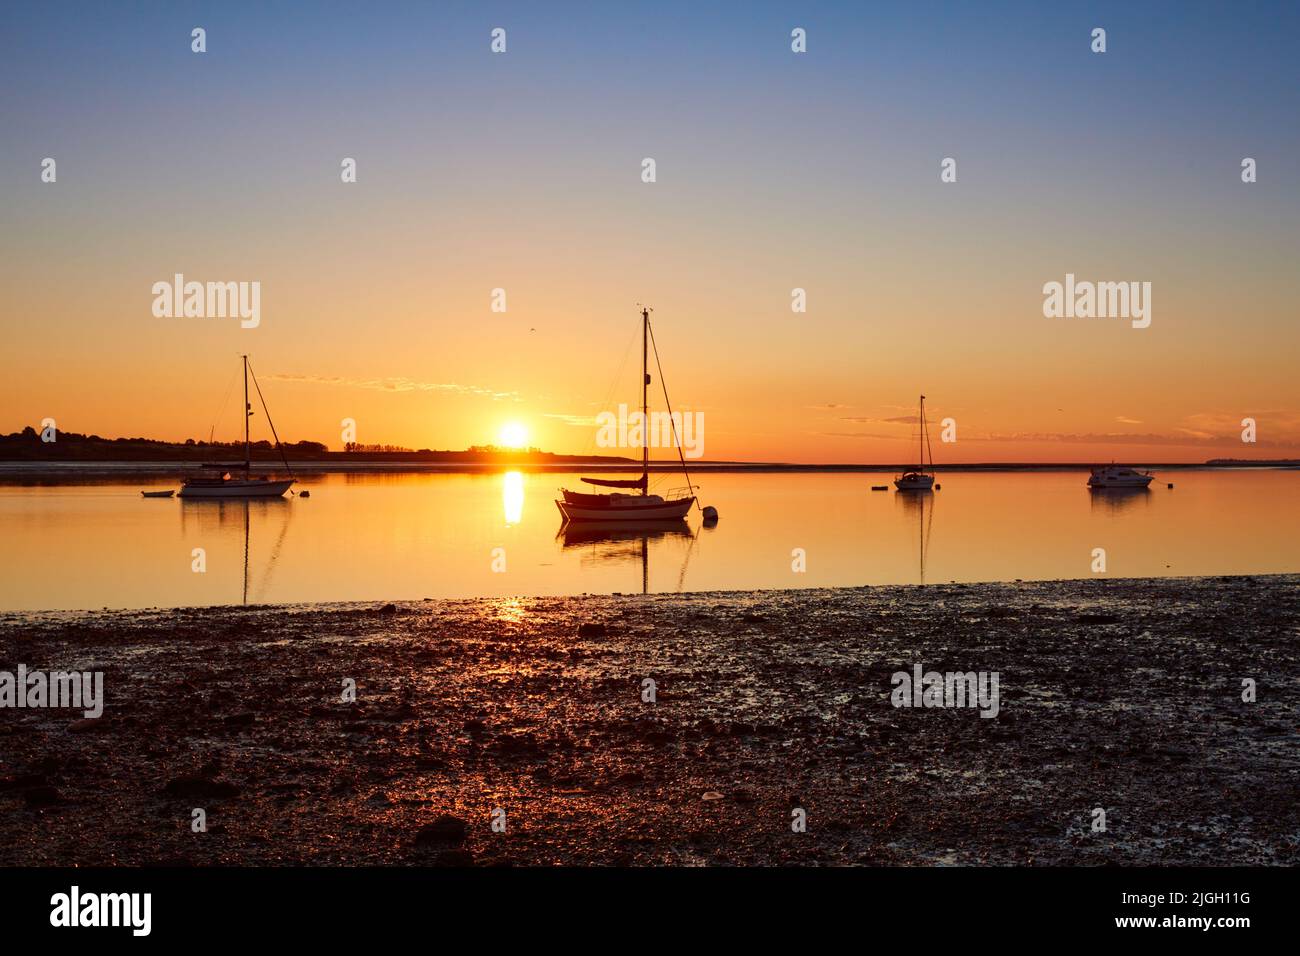 Swale Estuary, Kent, UK. 11th July 2022: UK Weather. A bright clear sunrise over Yachts  moored in the Swale Estuary near Oare in Kent as a week of hot temperatures is predicted possibly rising to the mid 30s. Credit: Alan Payton/Alamy Live News. Stock Photo